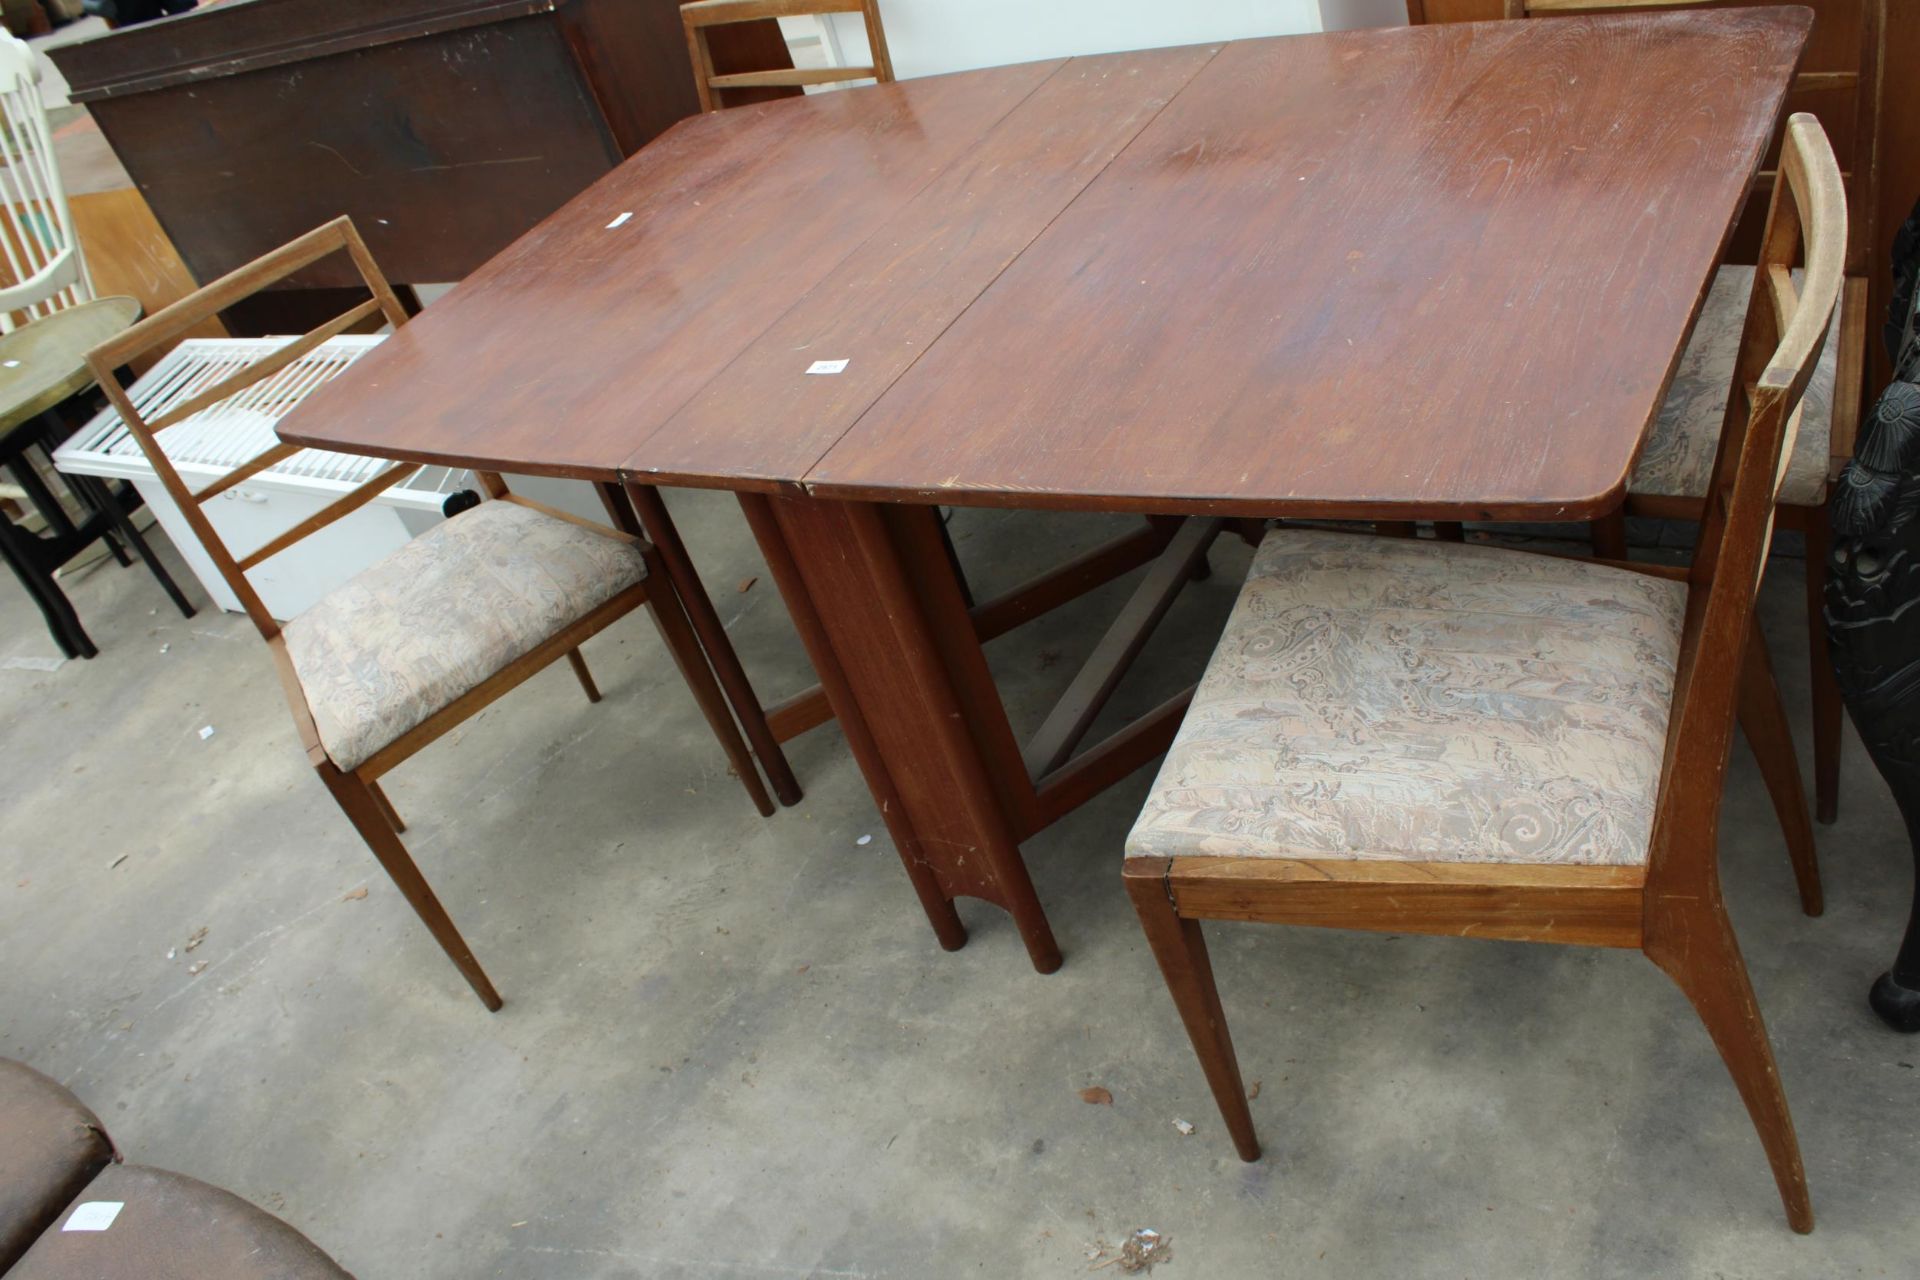 A RETRO TEAK DROP-LEAF DINING TABLE, 59" X 36" OPENED AND FOUR LADDER-BACK DINING CHAIRS - Image 2 of 3